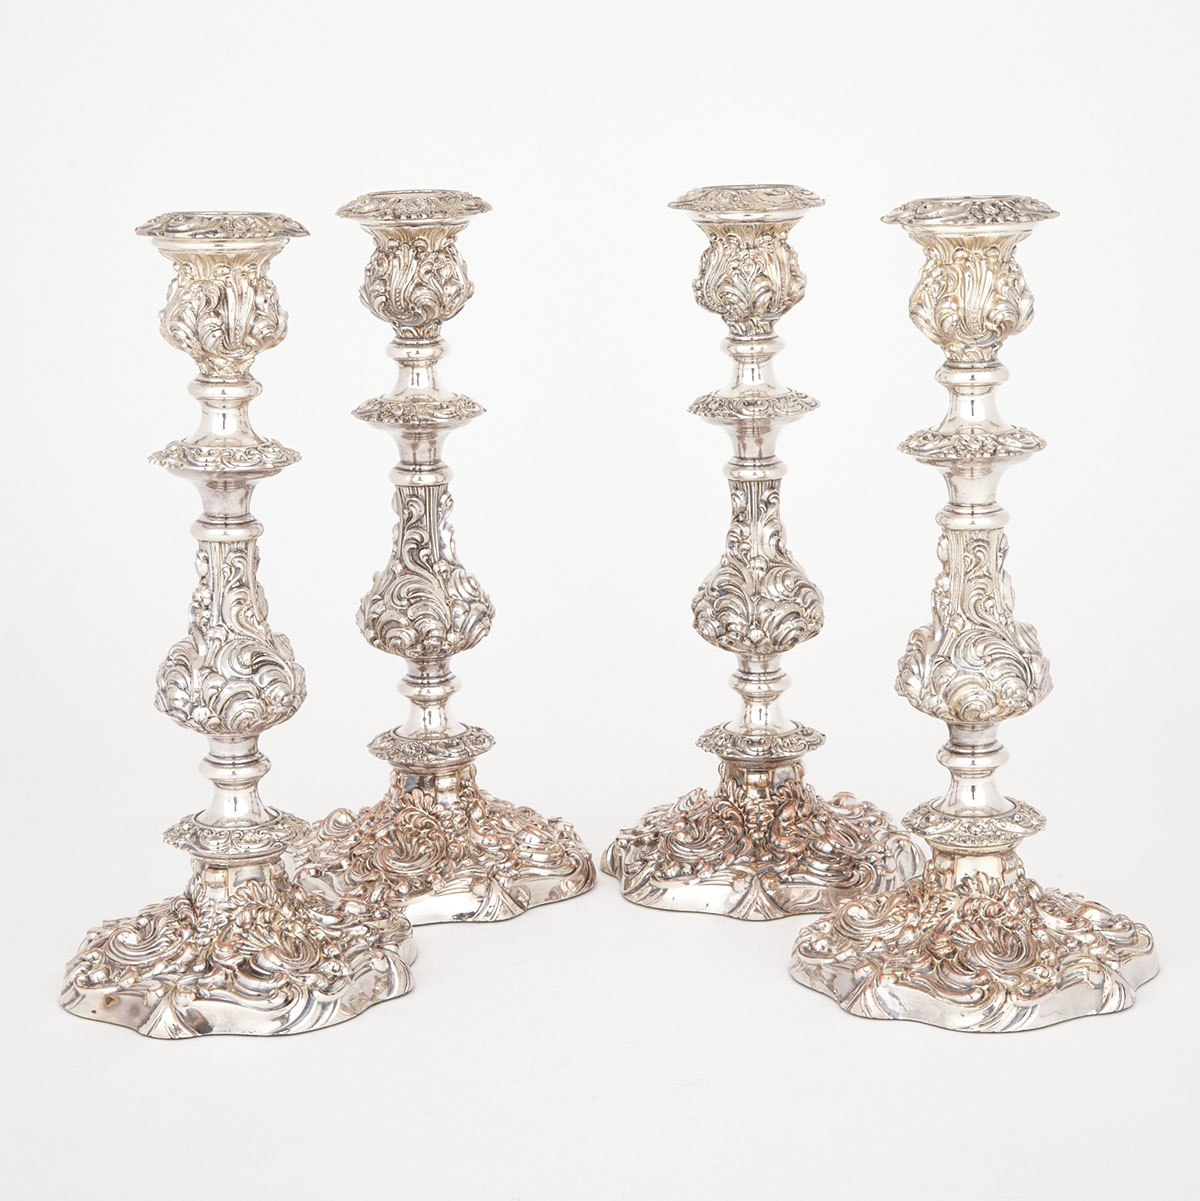 Set of Four English Silver Plated Table Candlesticks, Barker-Ellis, 20th century